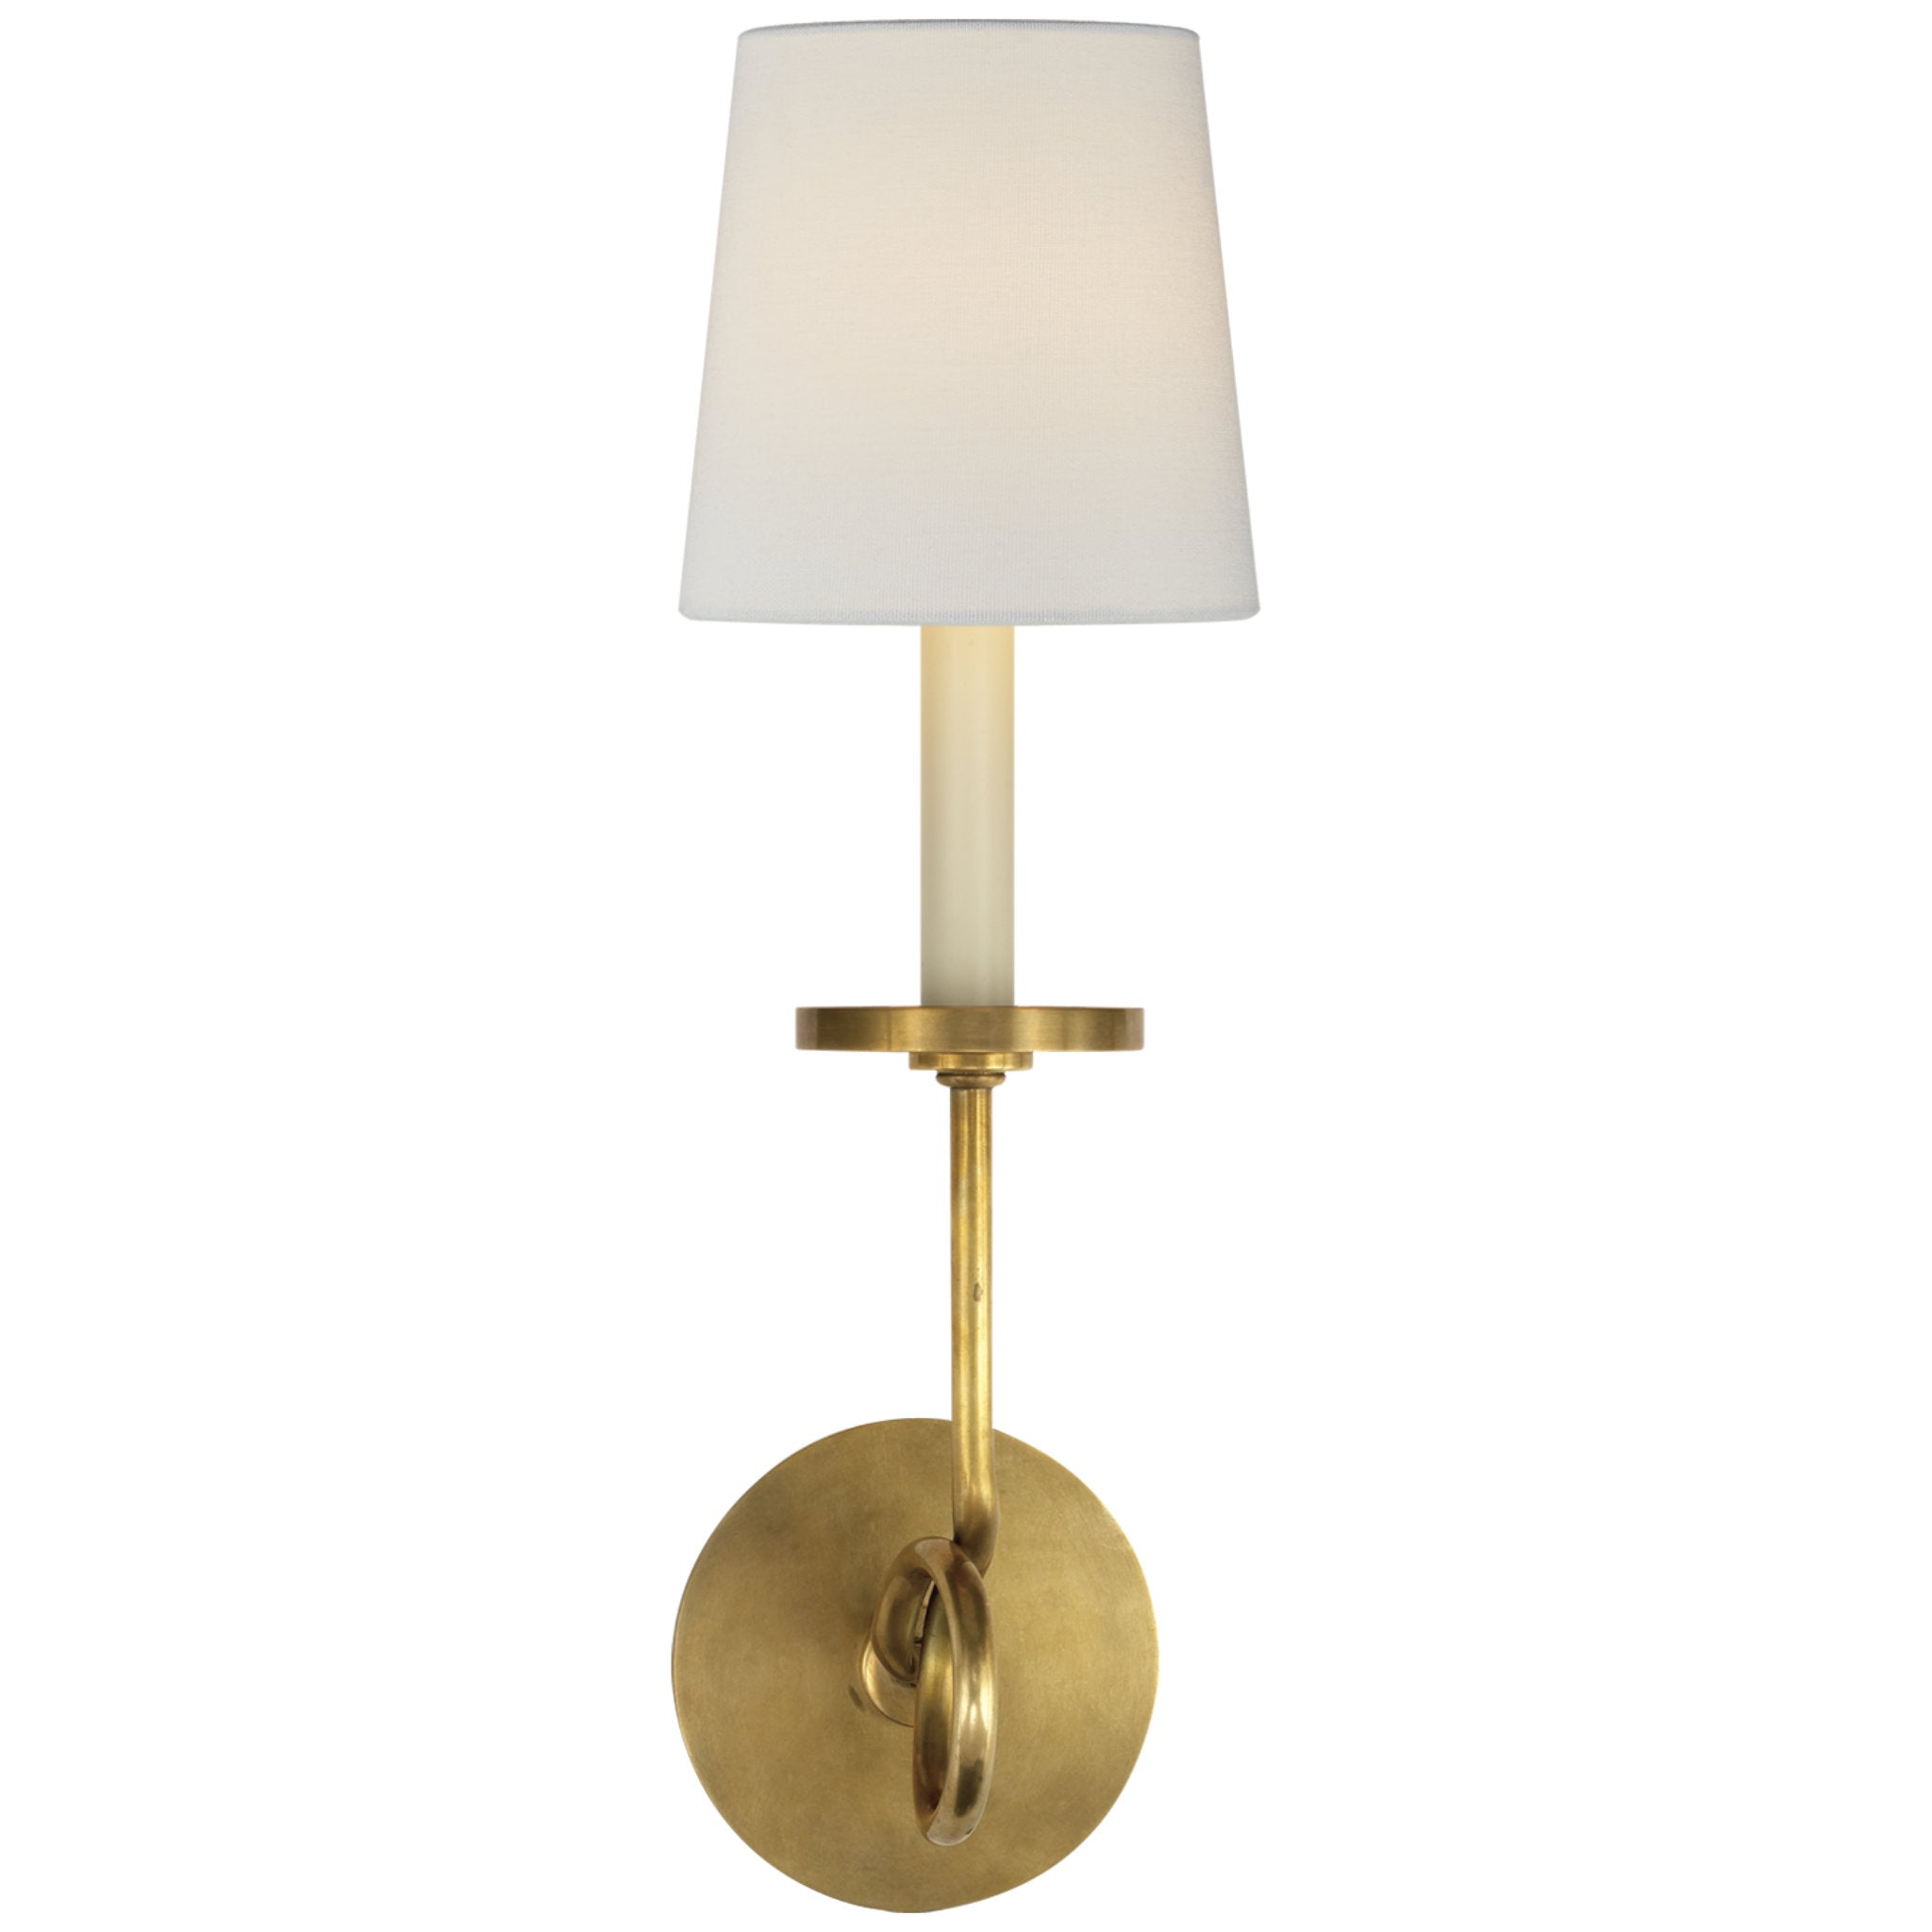 Chapman & Myers Symmetric Twist Single Sconce in Antique-Burnished Brass with Linen Shade